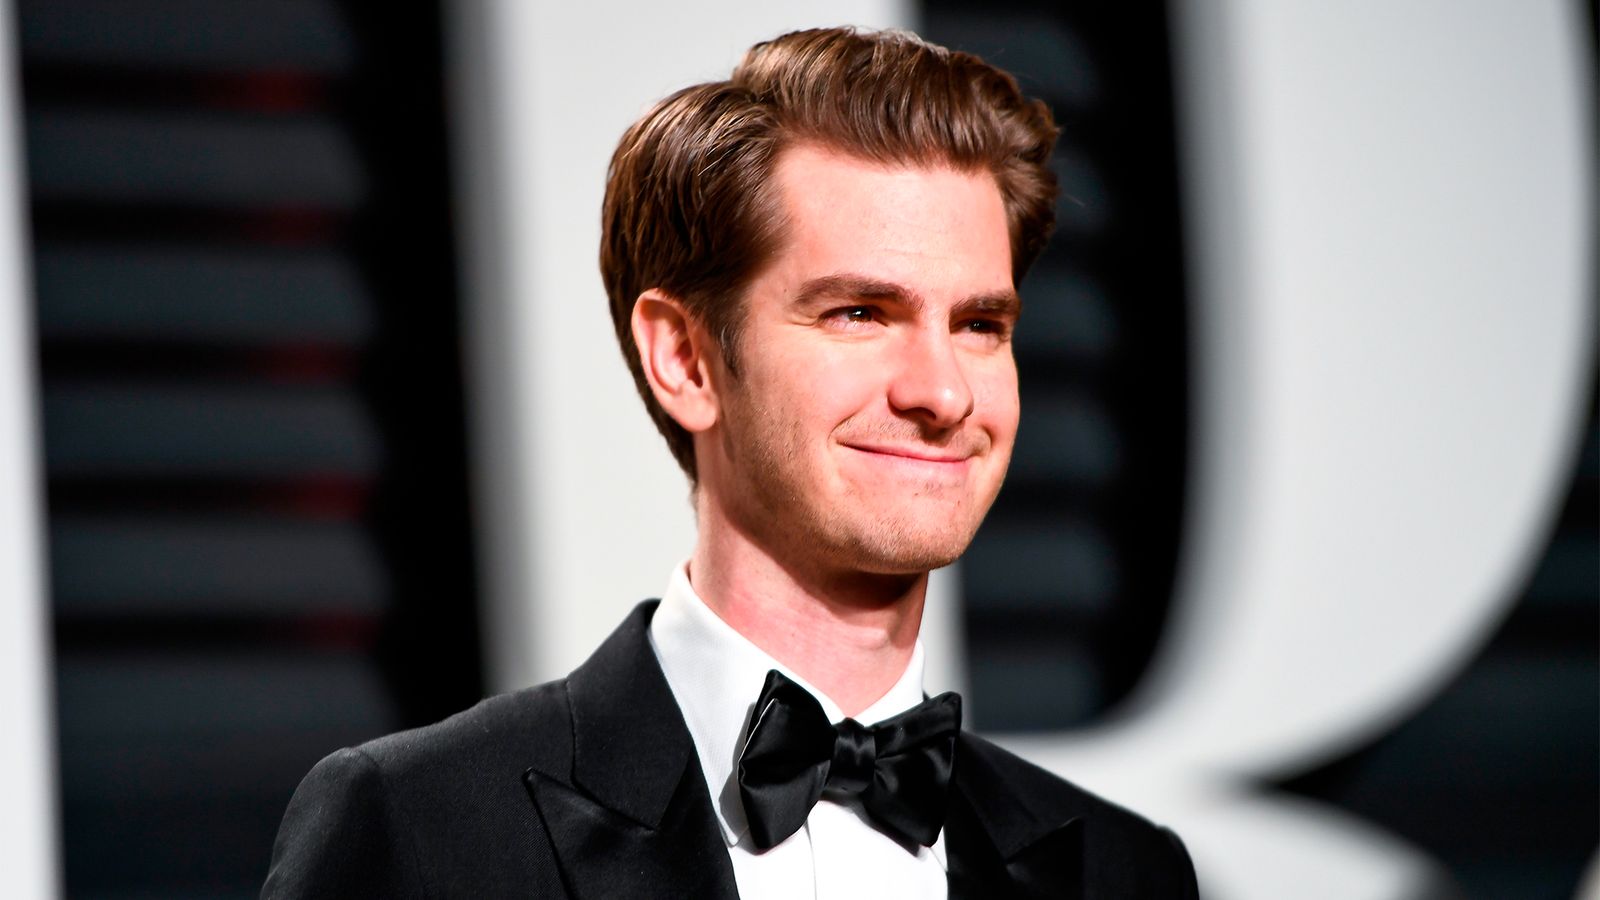 Andrew Garfield To Be Honoured With Golden Eye Award At Zurich Film Festival